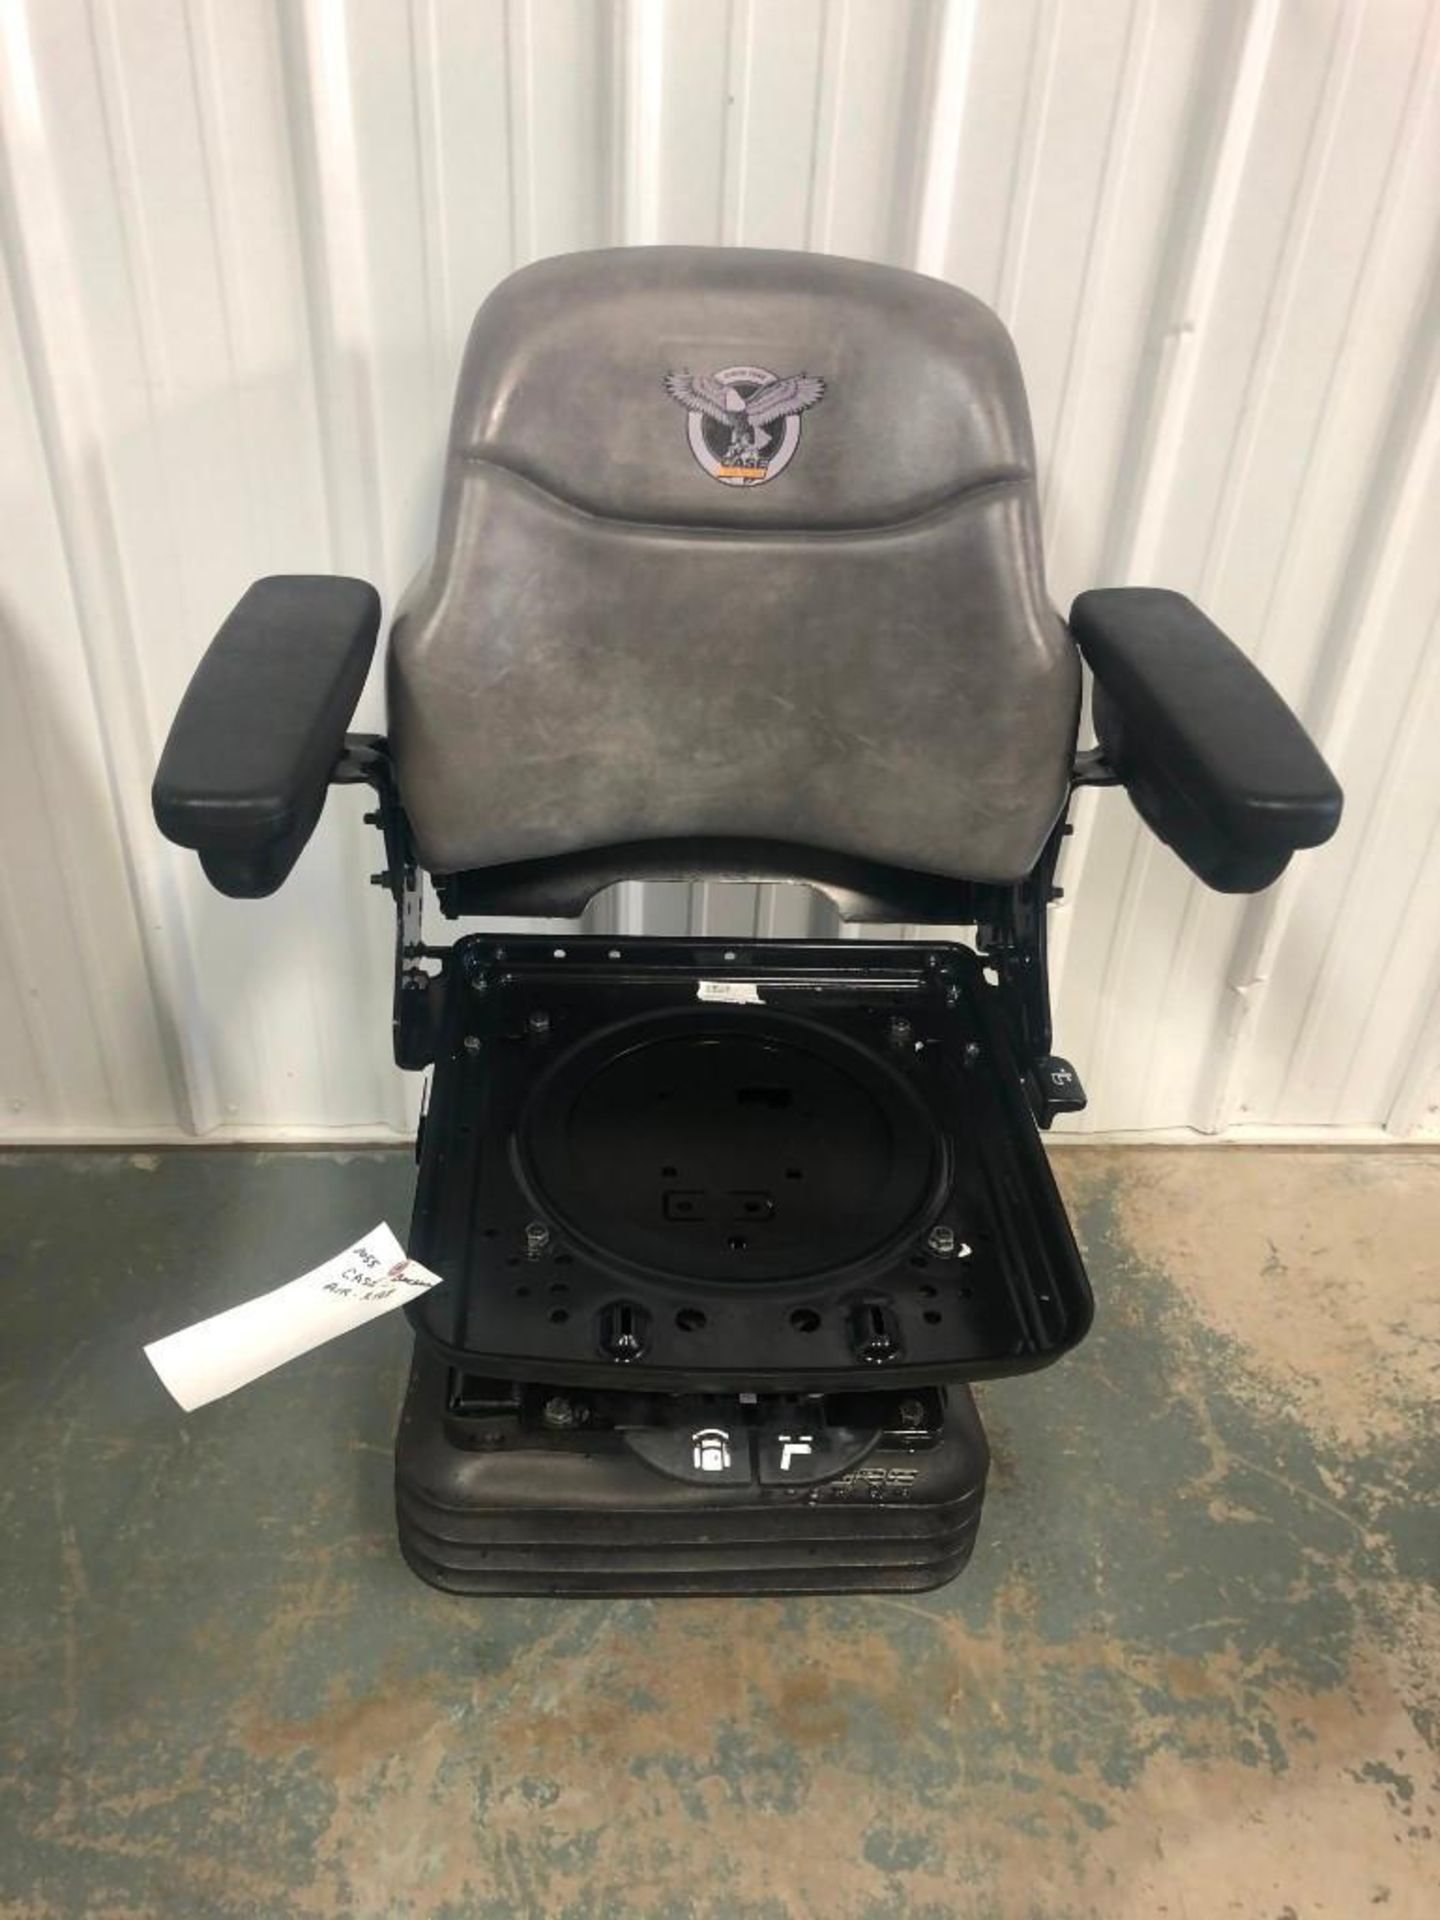 Case Backhoe Air-Ride Seat. Located at 301 E Henry Street, Mt. Pleasant, IA 52641.